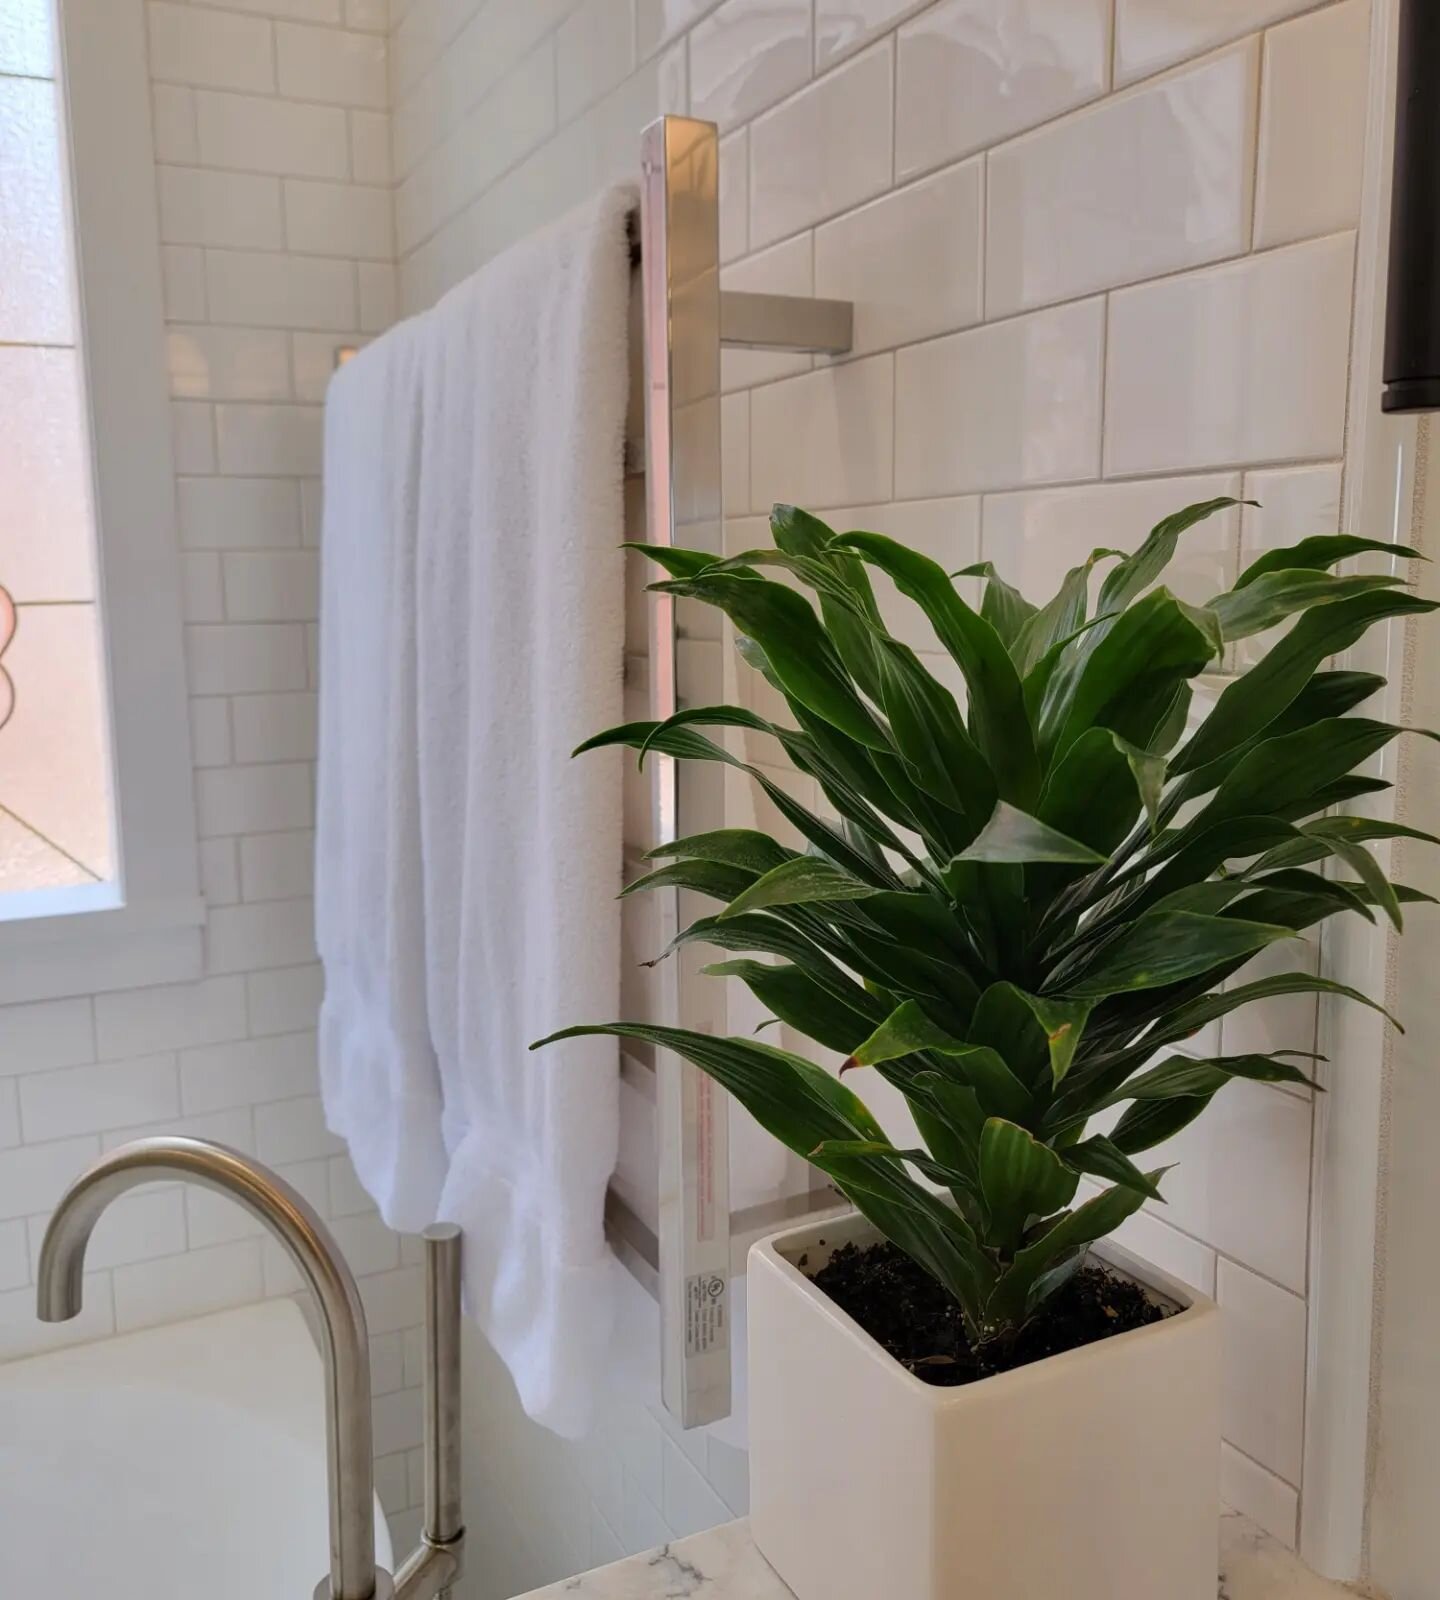 A heated towel rack and heated floors in the bathroom make all the difference 😊

.
.
.
.
.
.
.
.

.
.
.
.
.

#marquettemi #uppermichigan #upperpeninsulamichigan #vacationhome #vacationrental #airbnb #lakesuperior #puremichigan #travelup #upnorthmich